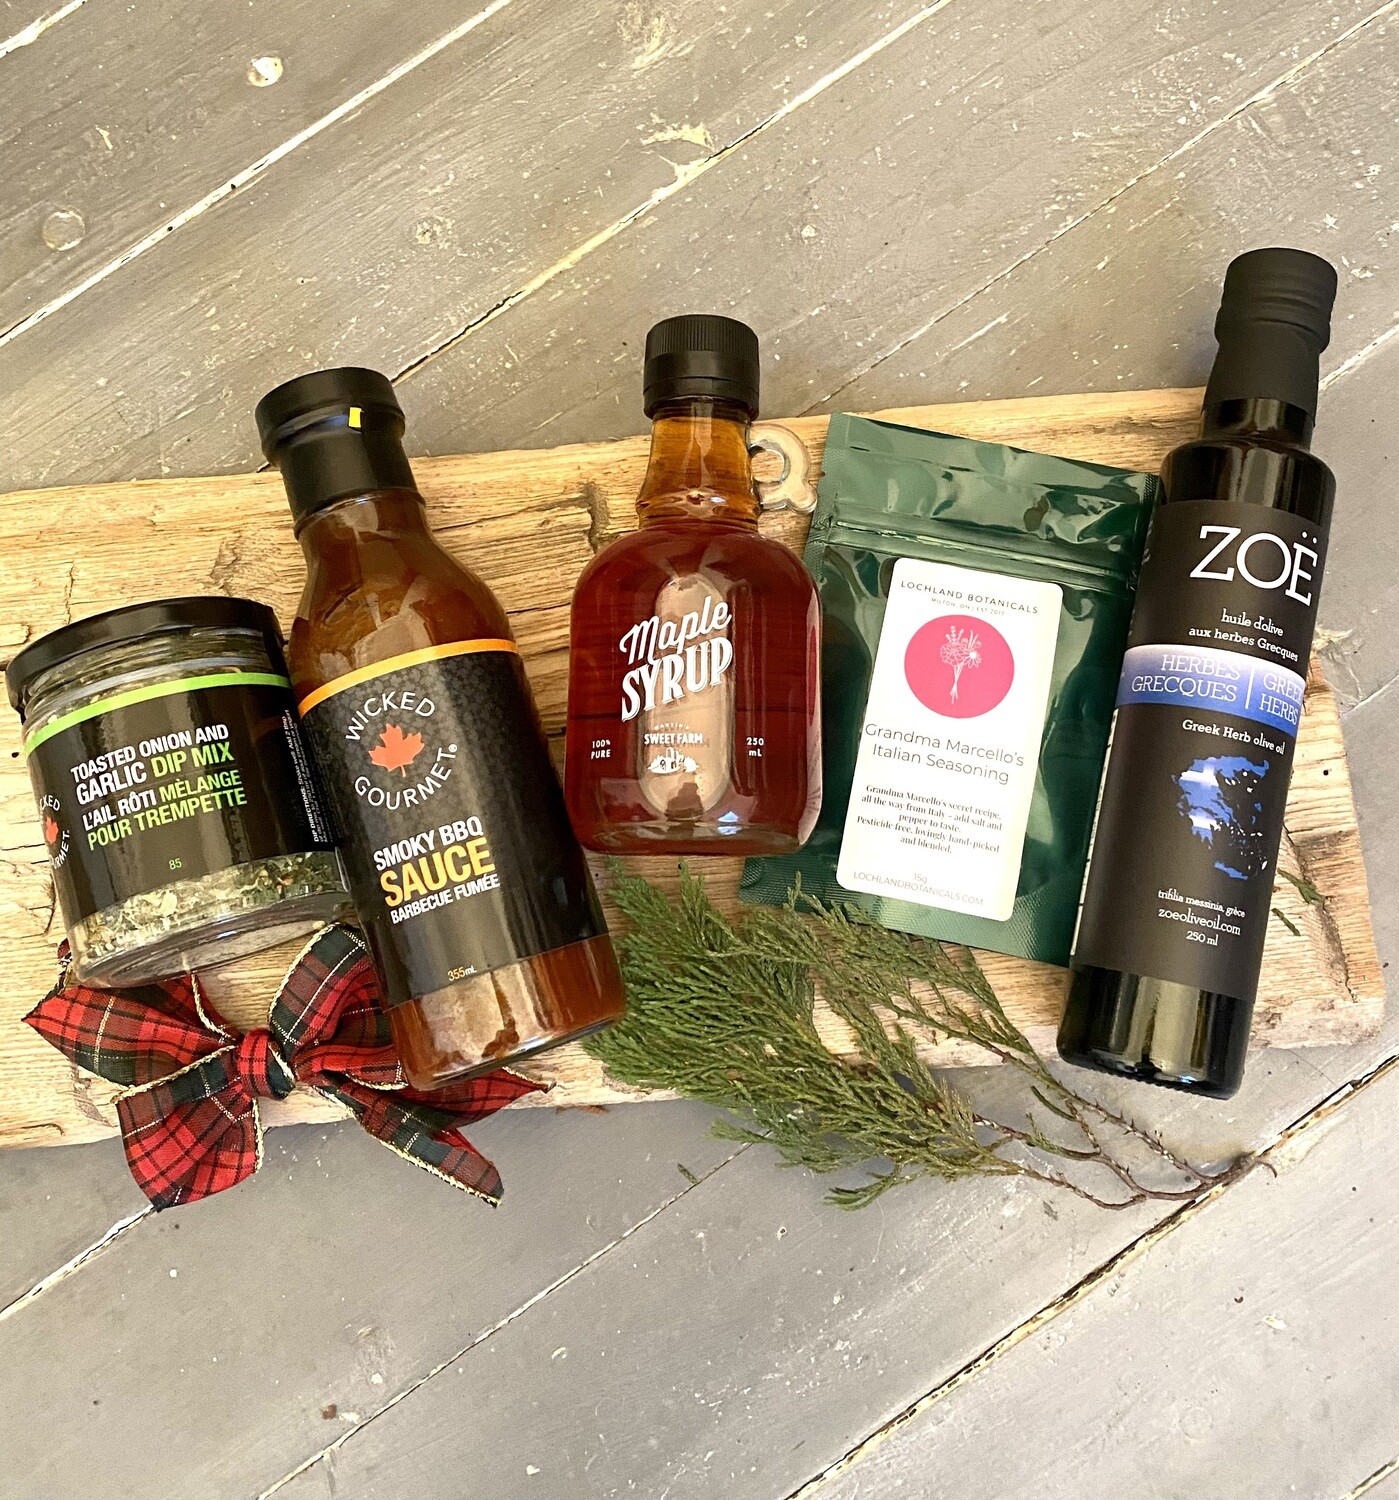 Foodie Gift Basket - $5 Goes To Pack a Bag Foundation